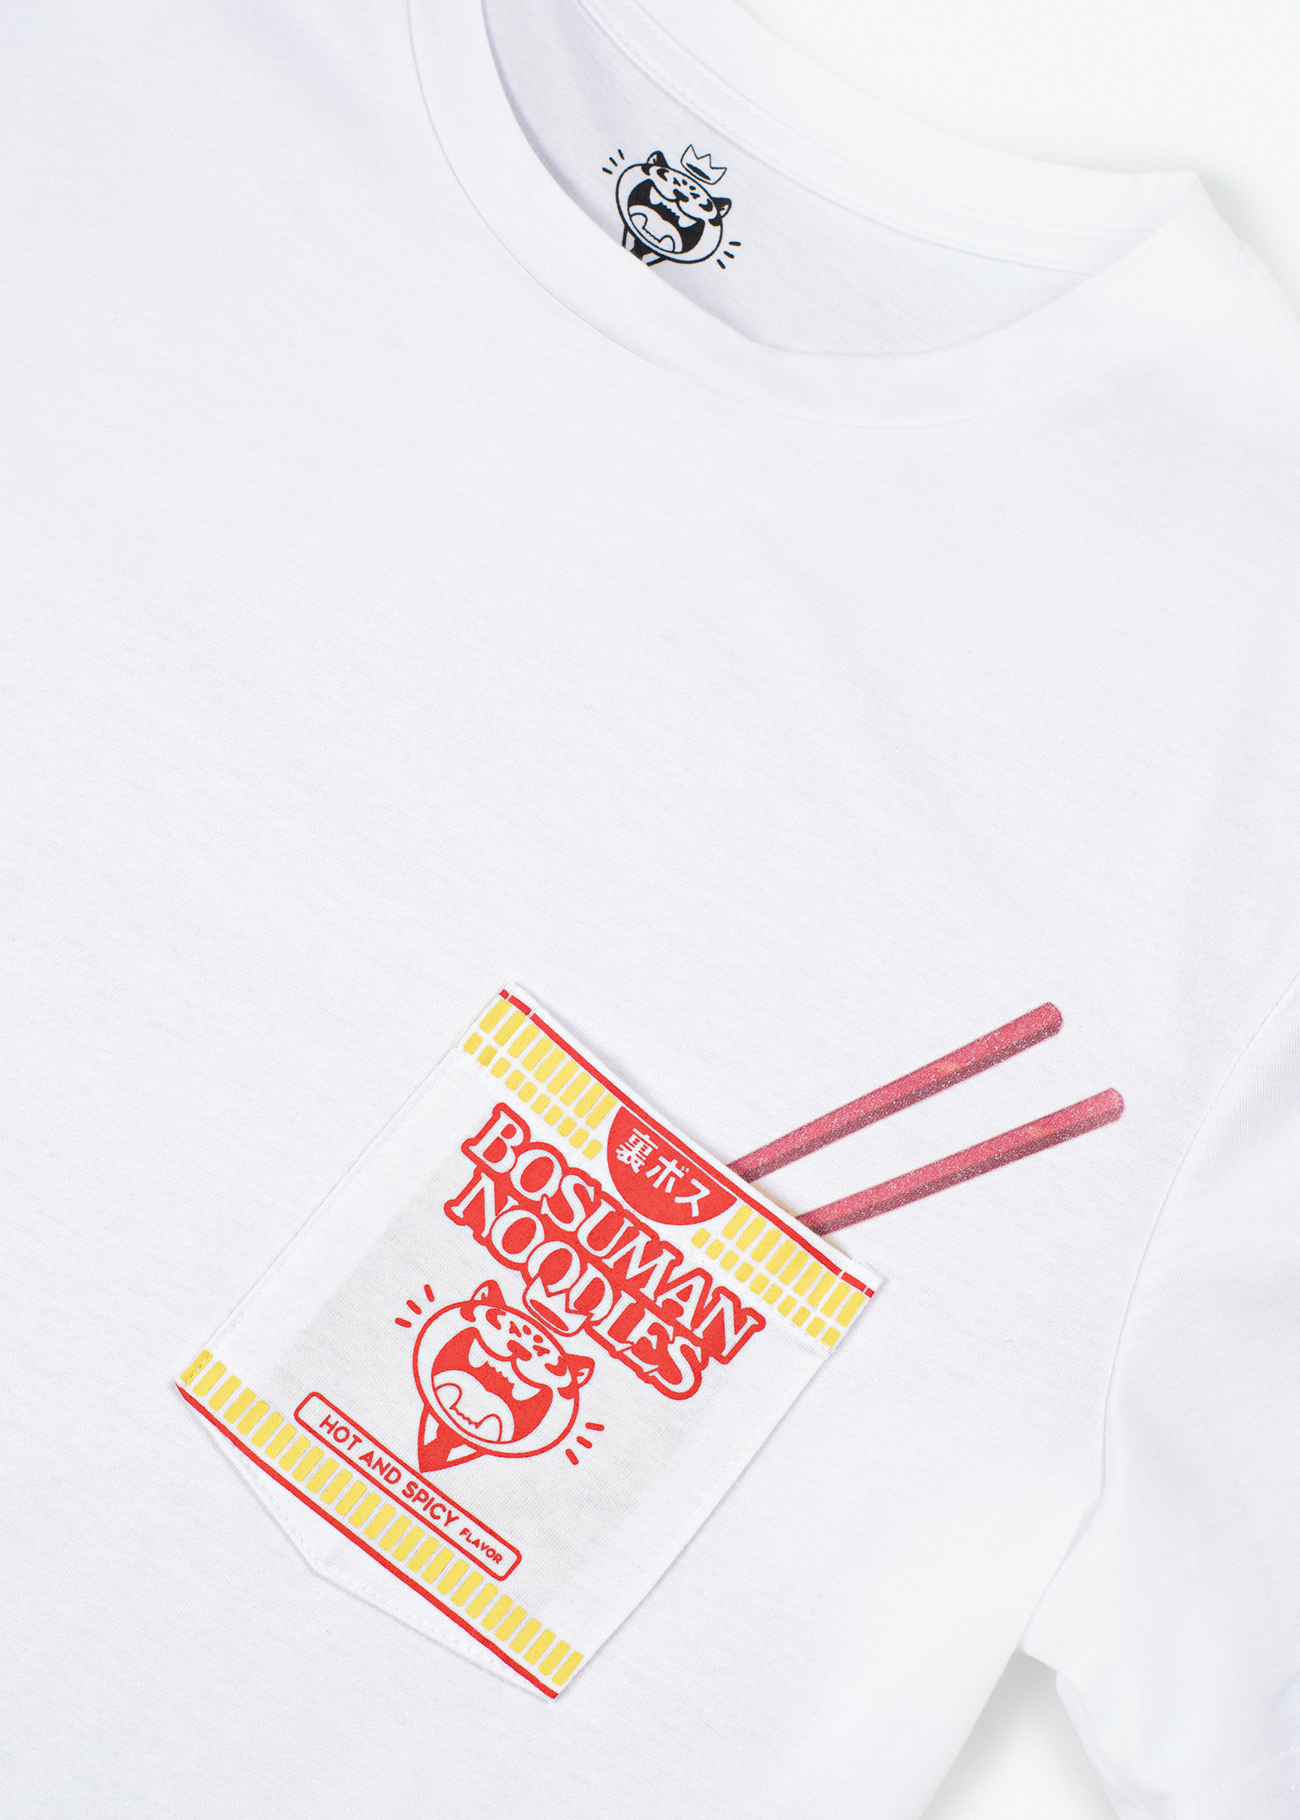 An anime tshirt featuring a pocket tee with ramen! Anime clothing, anime shirts, and more. High quality cotton clothes.